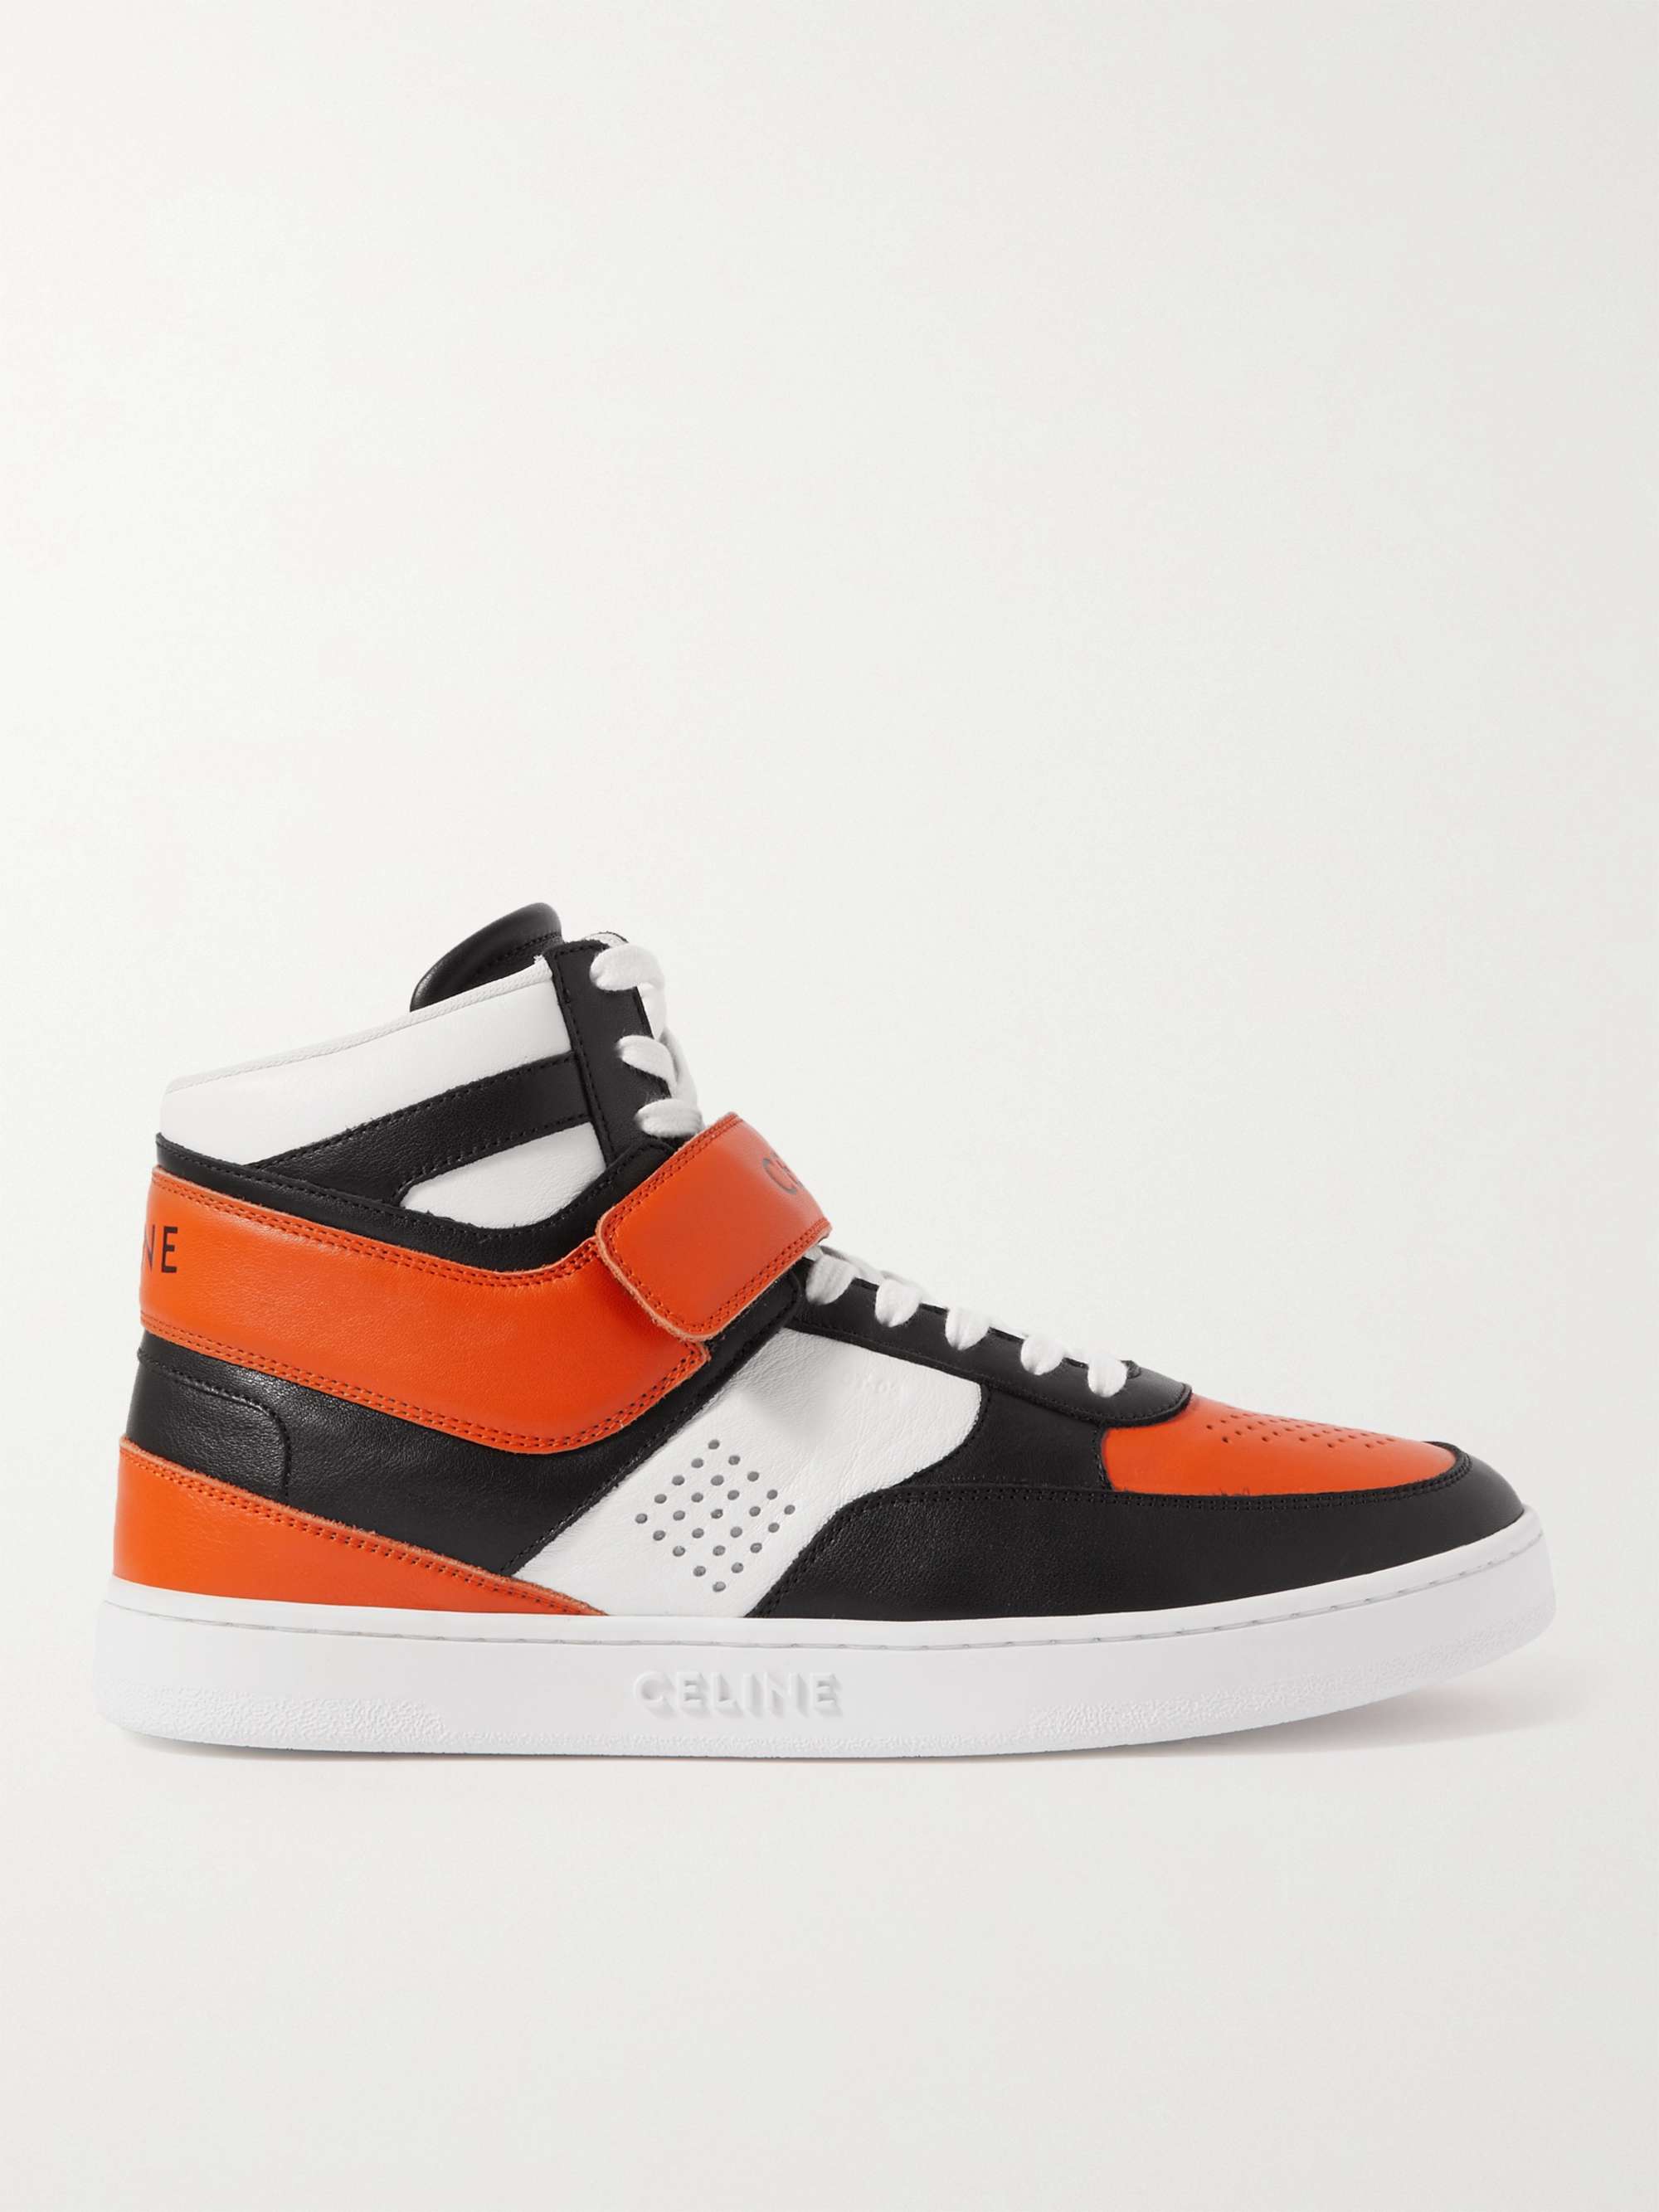 White CT-03 Leather High-Top Sneakers | CELINE HOMME | MR PORTER